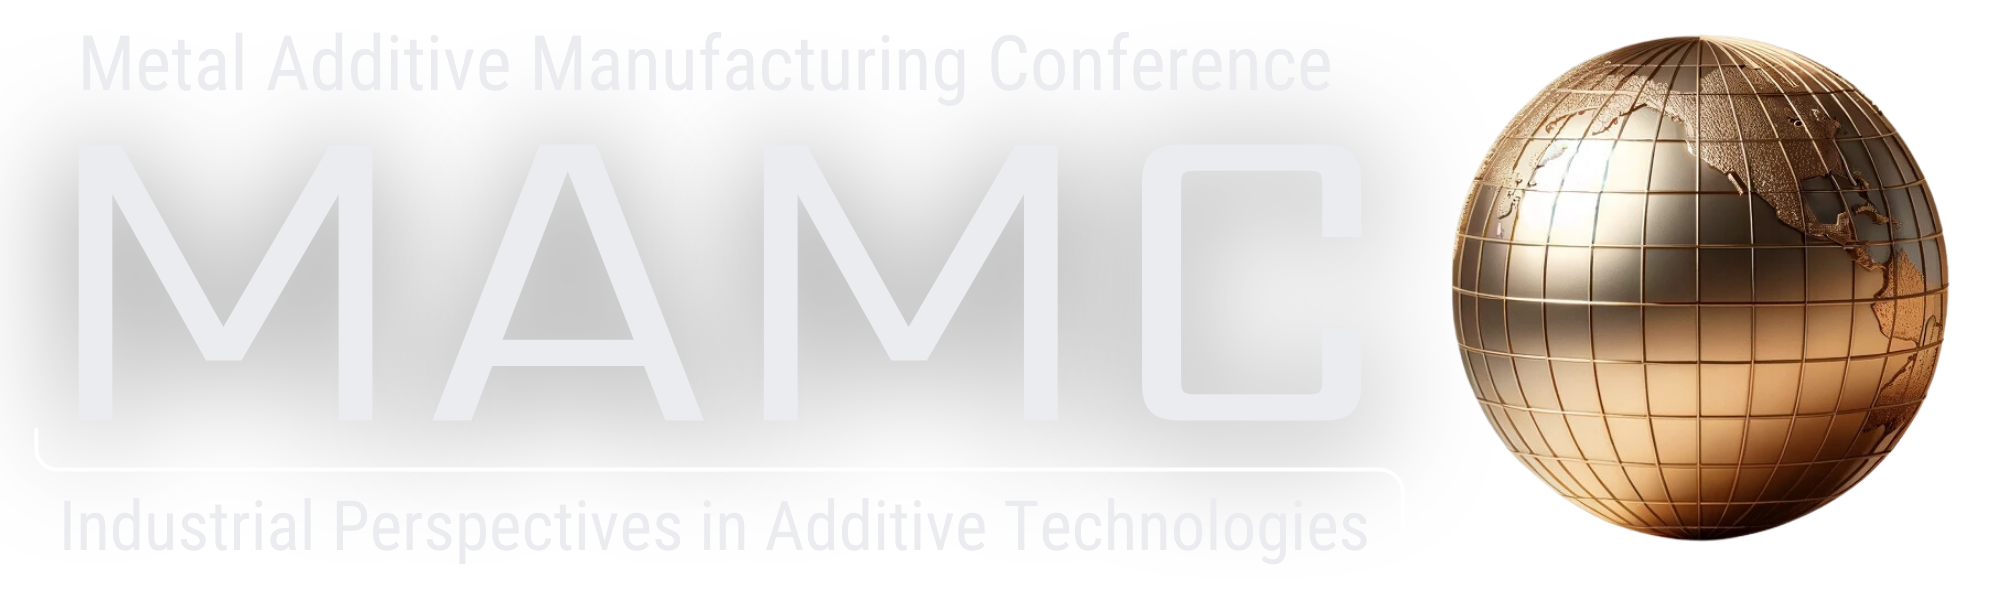 Metal Additive Manufacturing Conference